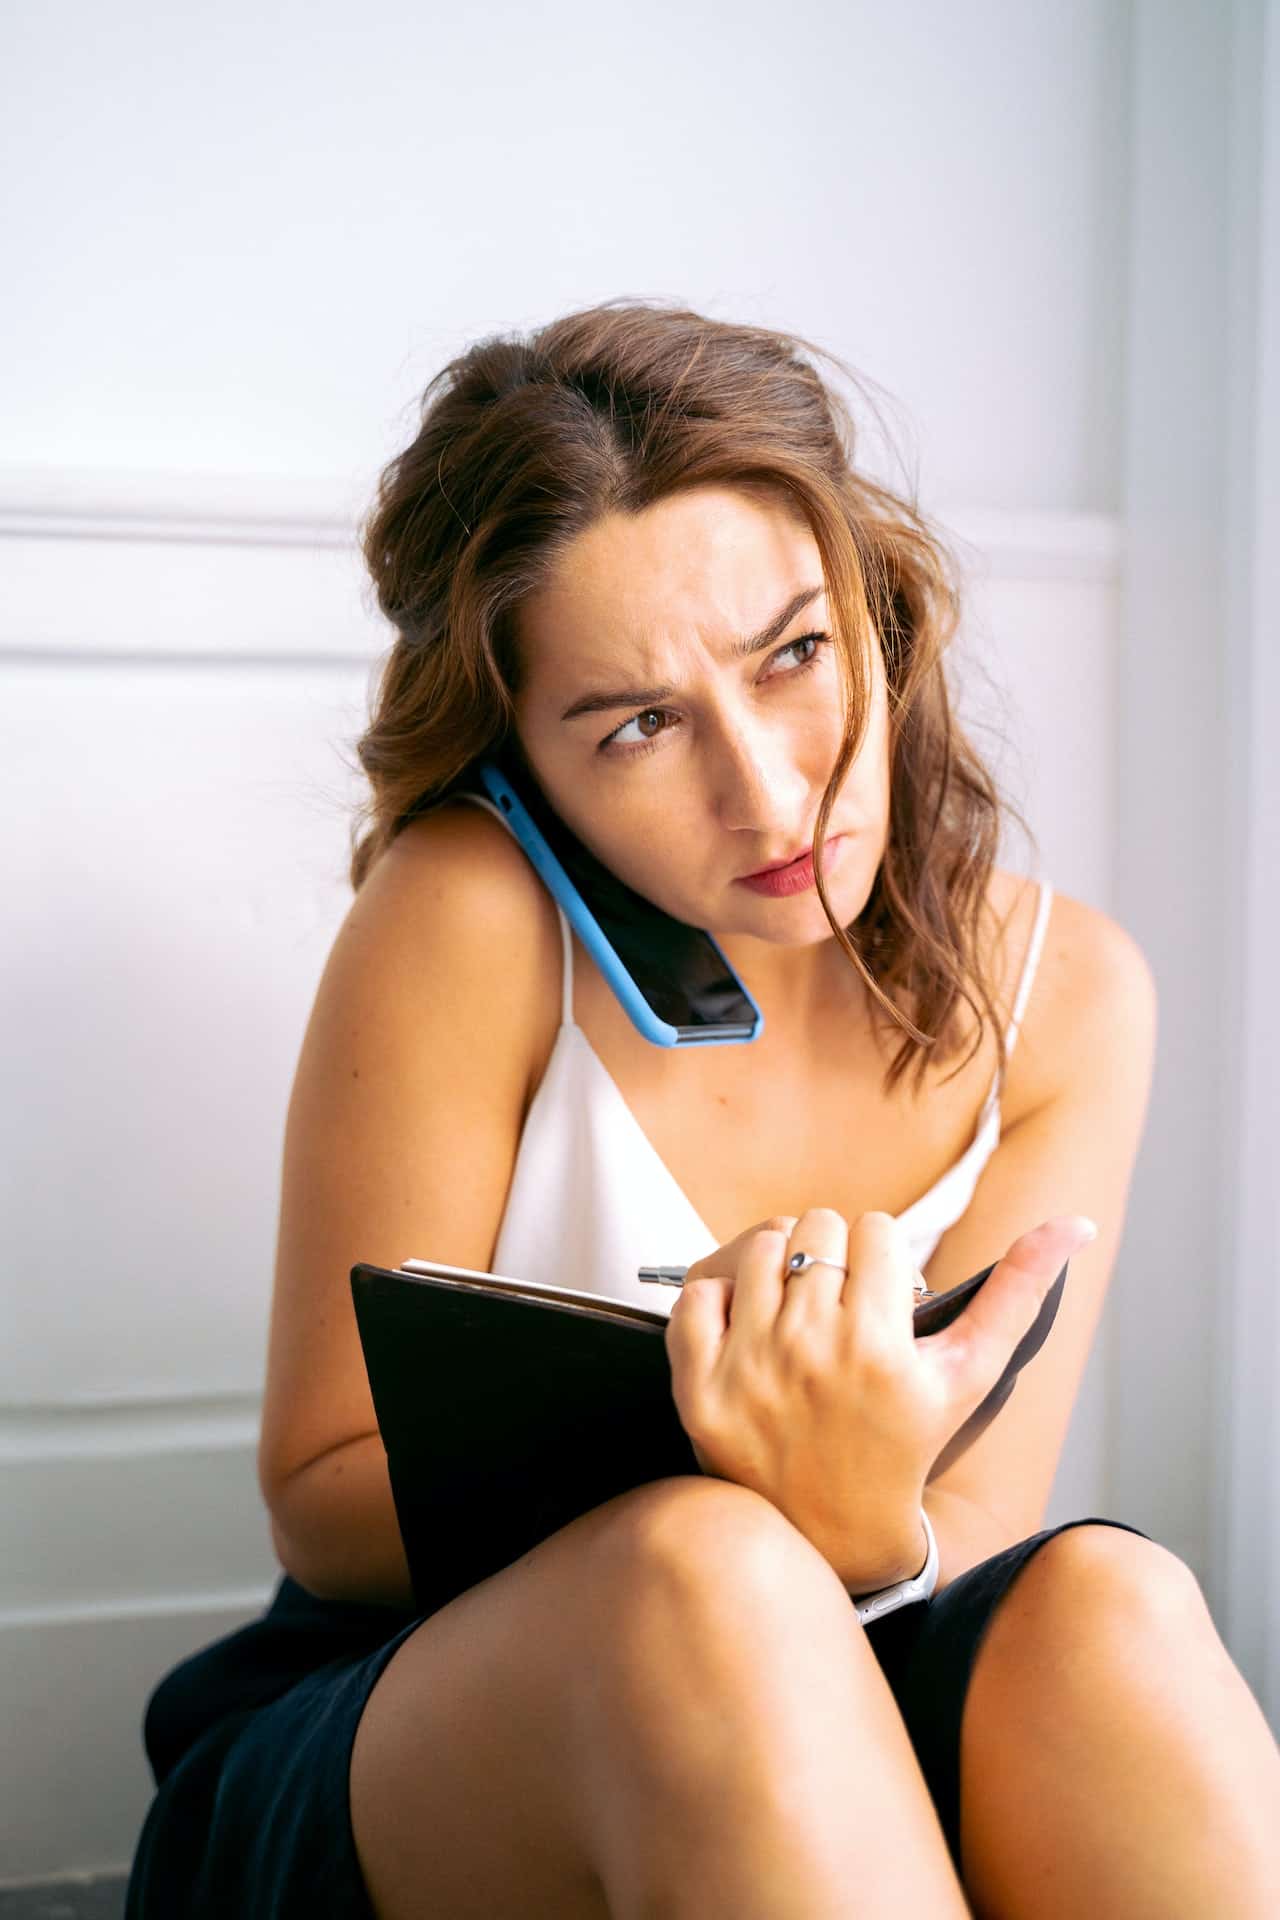 A woman sits on the floor against the wall with a frustrated look on her face. She is on a cell phone and has a notebook in her lap.